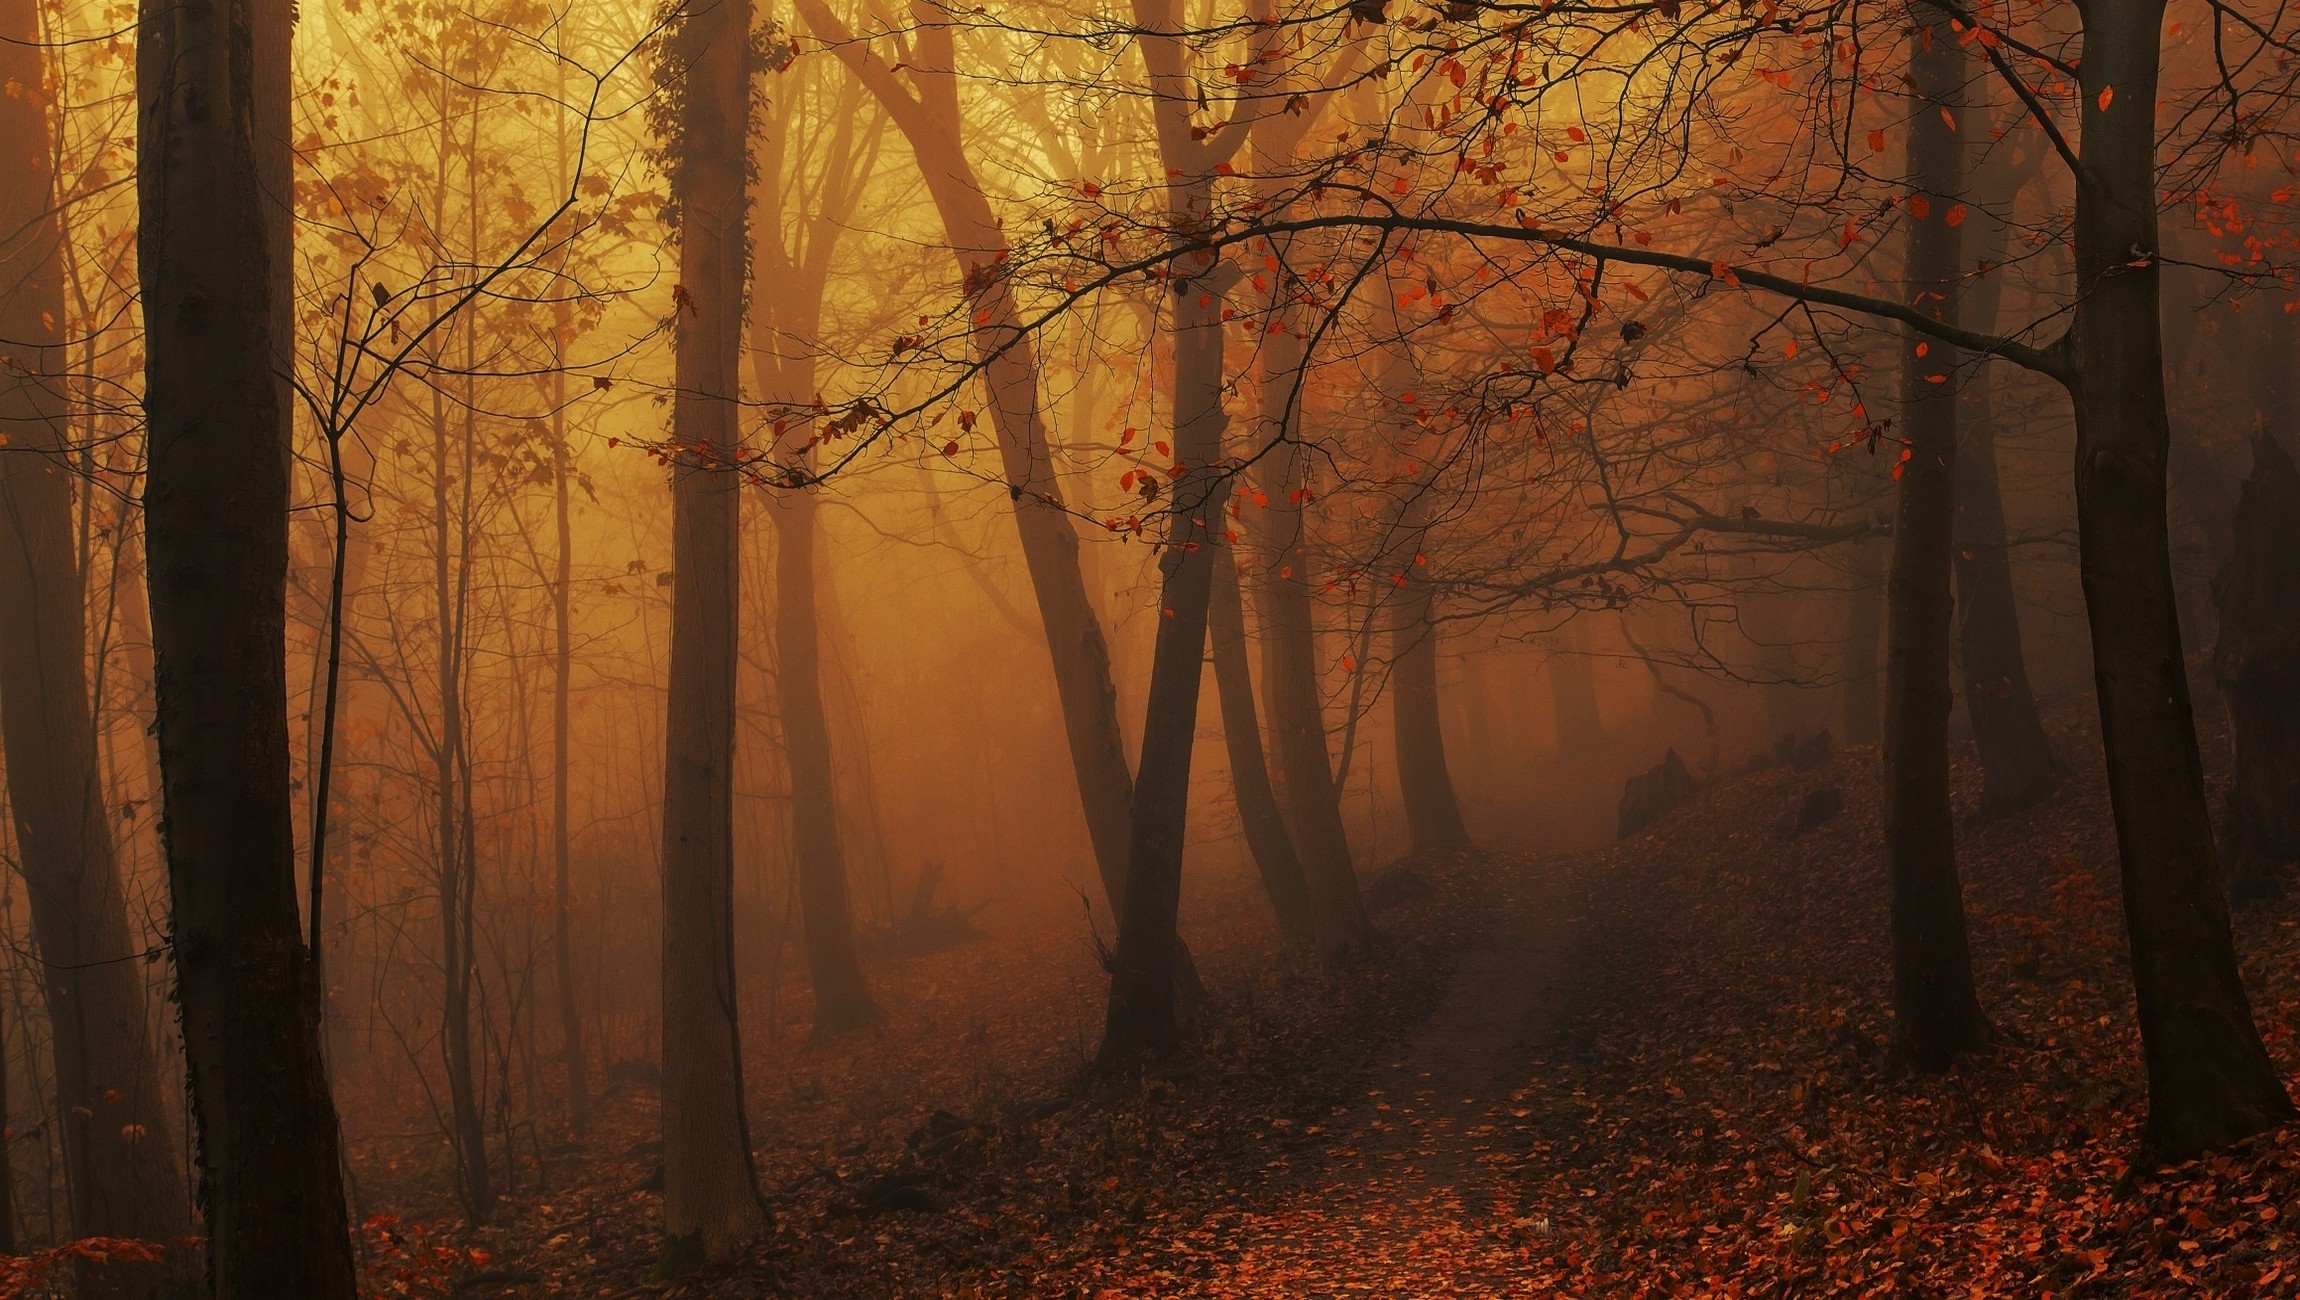 General 2300x1300 nature forest mist fall leaves path trees atmosphere morning sunlight hills amber